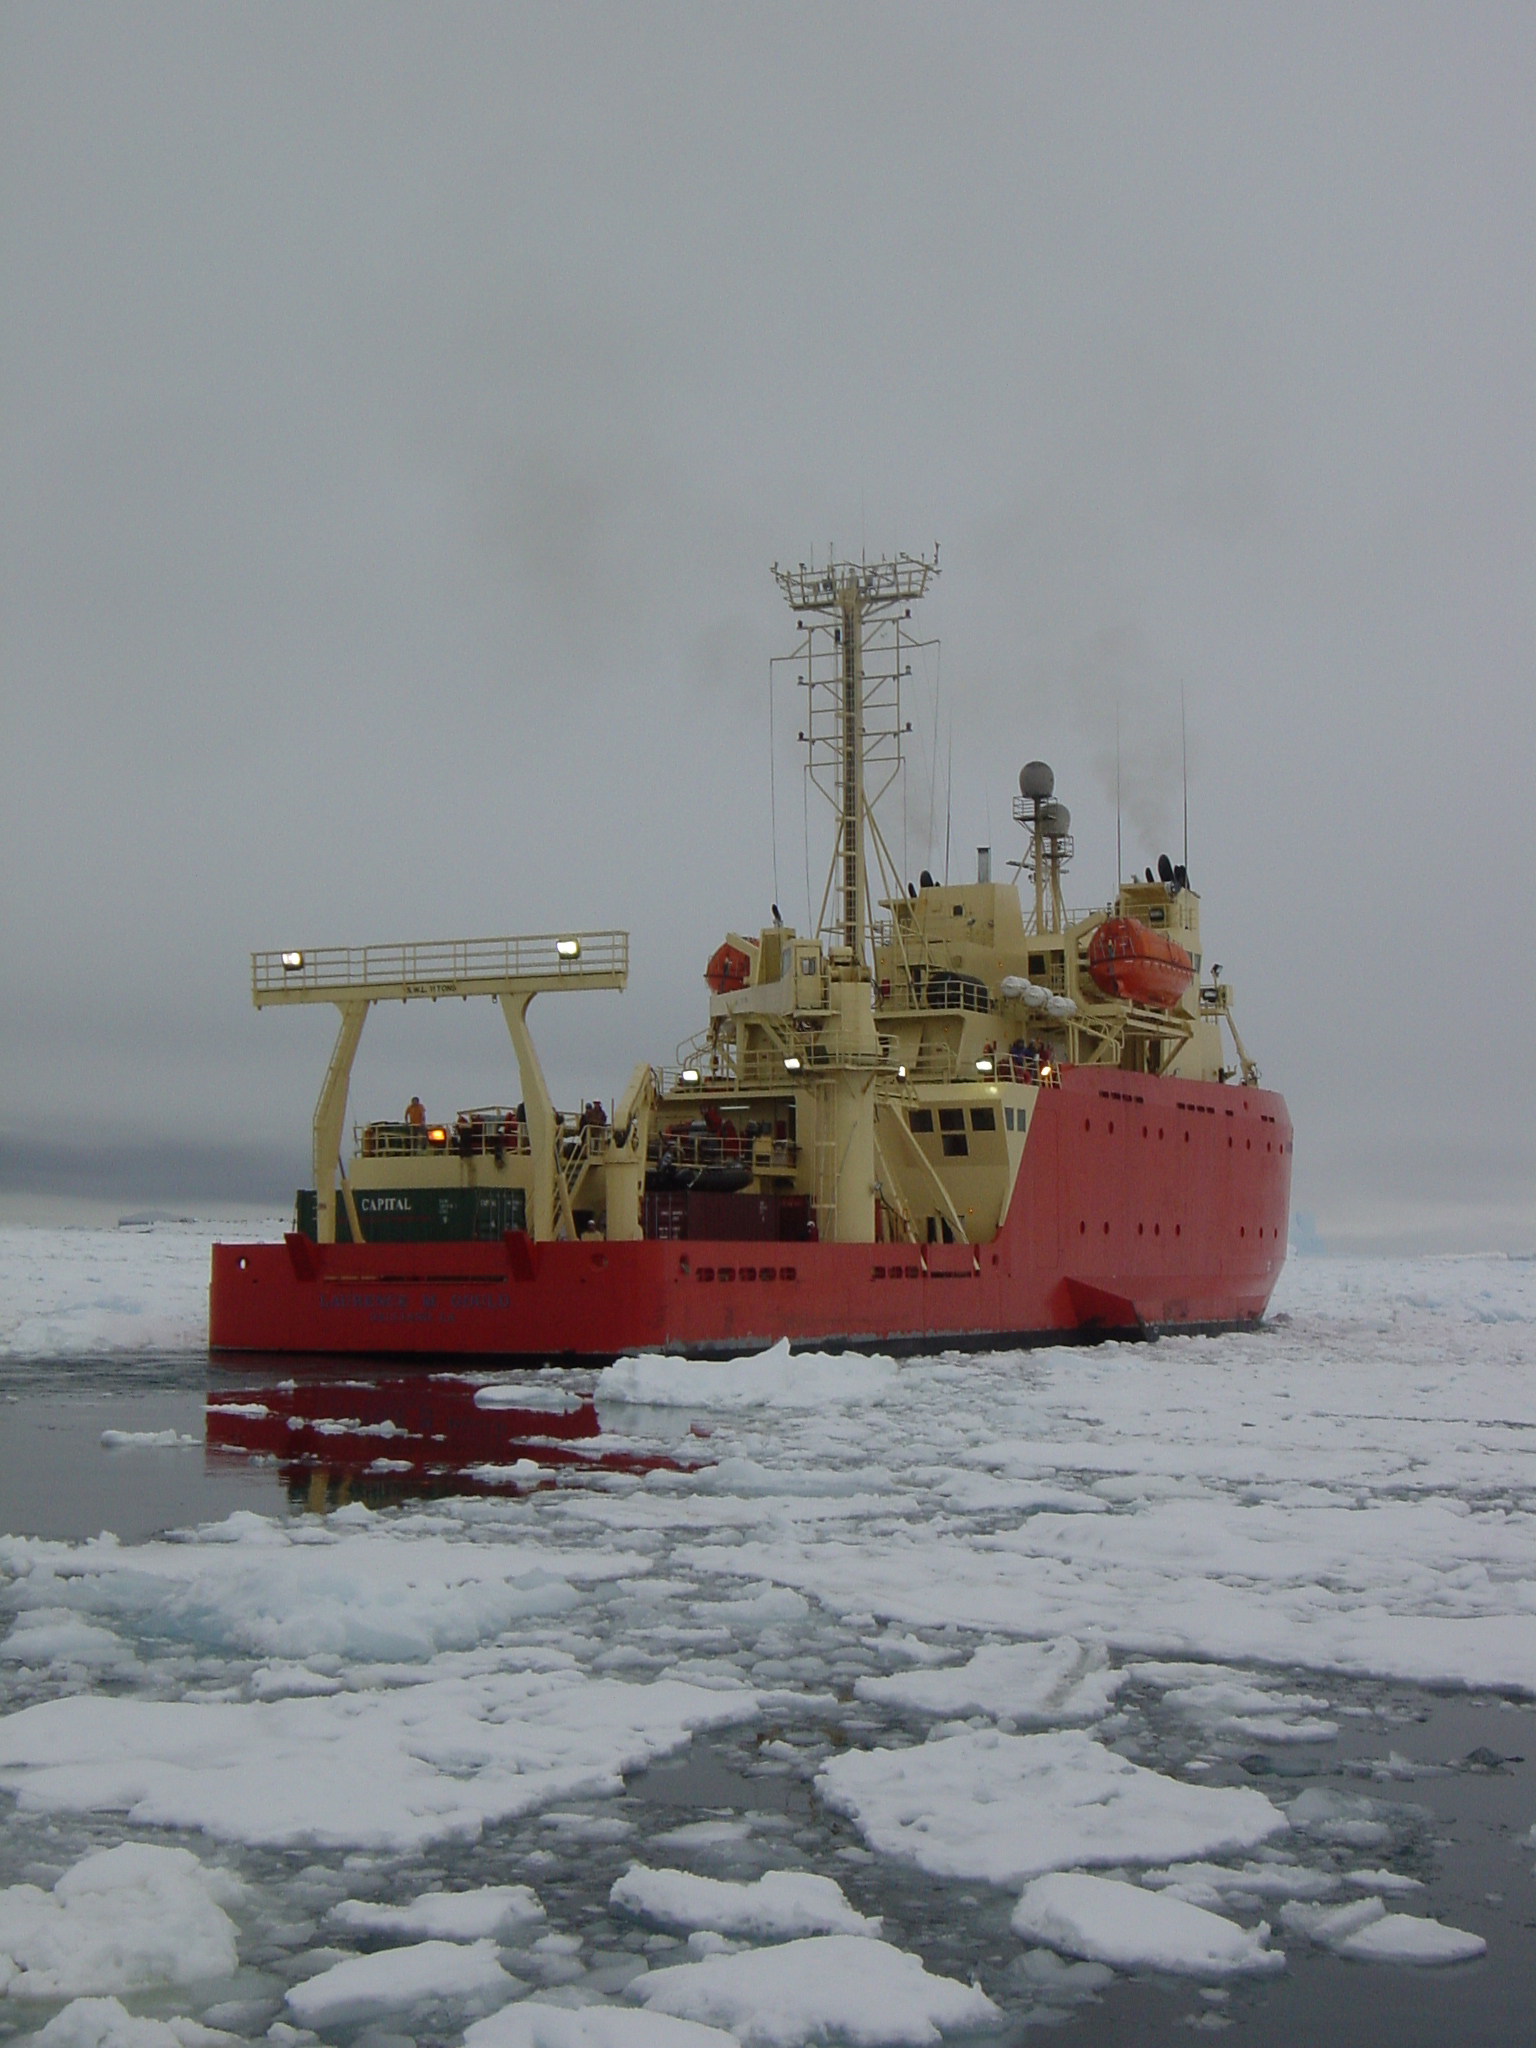 The starboard side of a red and yellow ship in icy water.